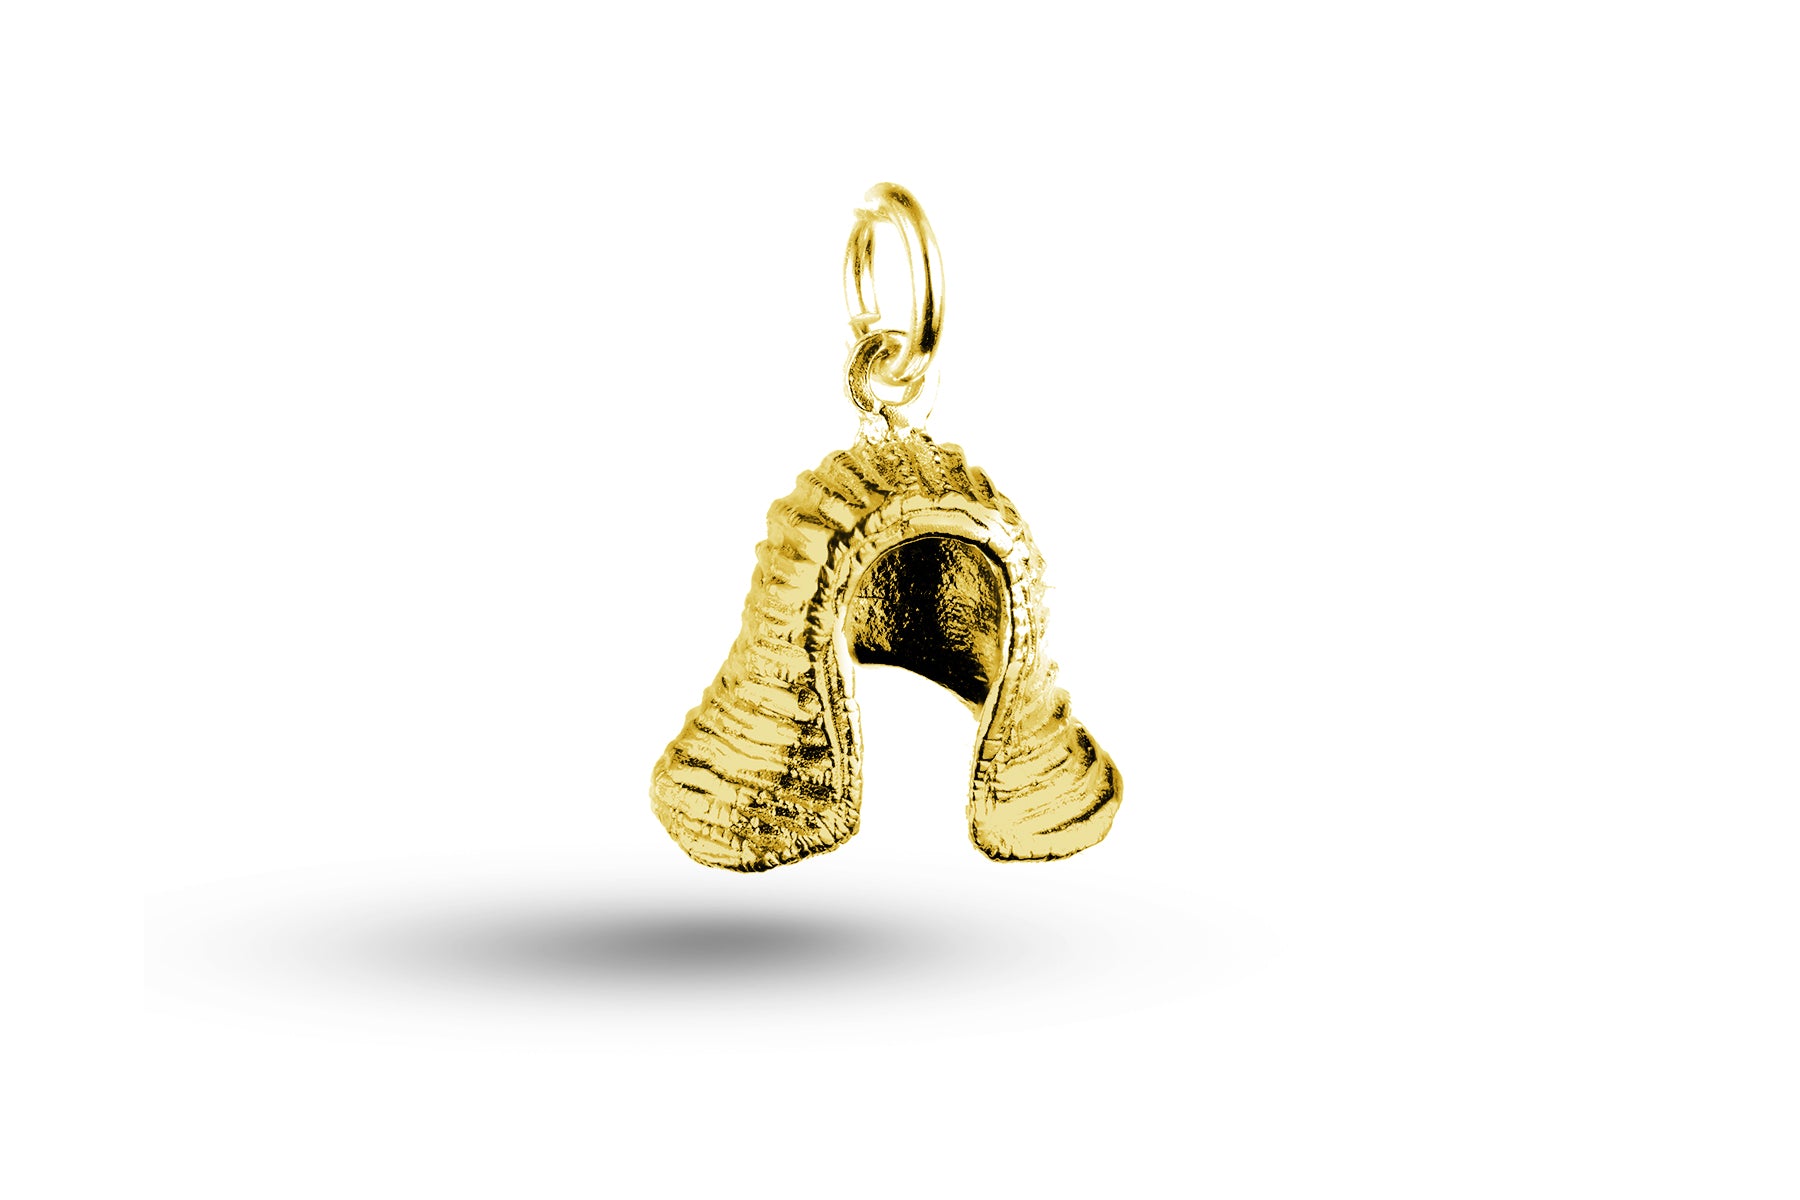 Yellow gold Judges Wig charm.